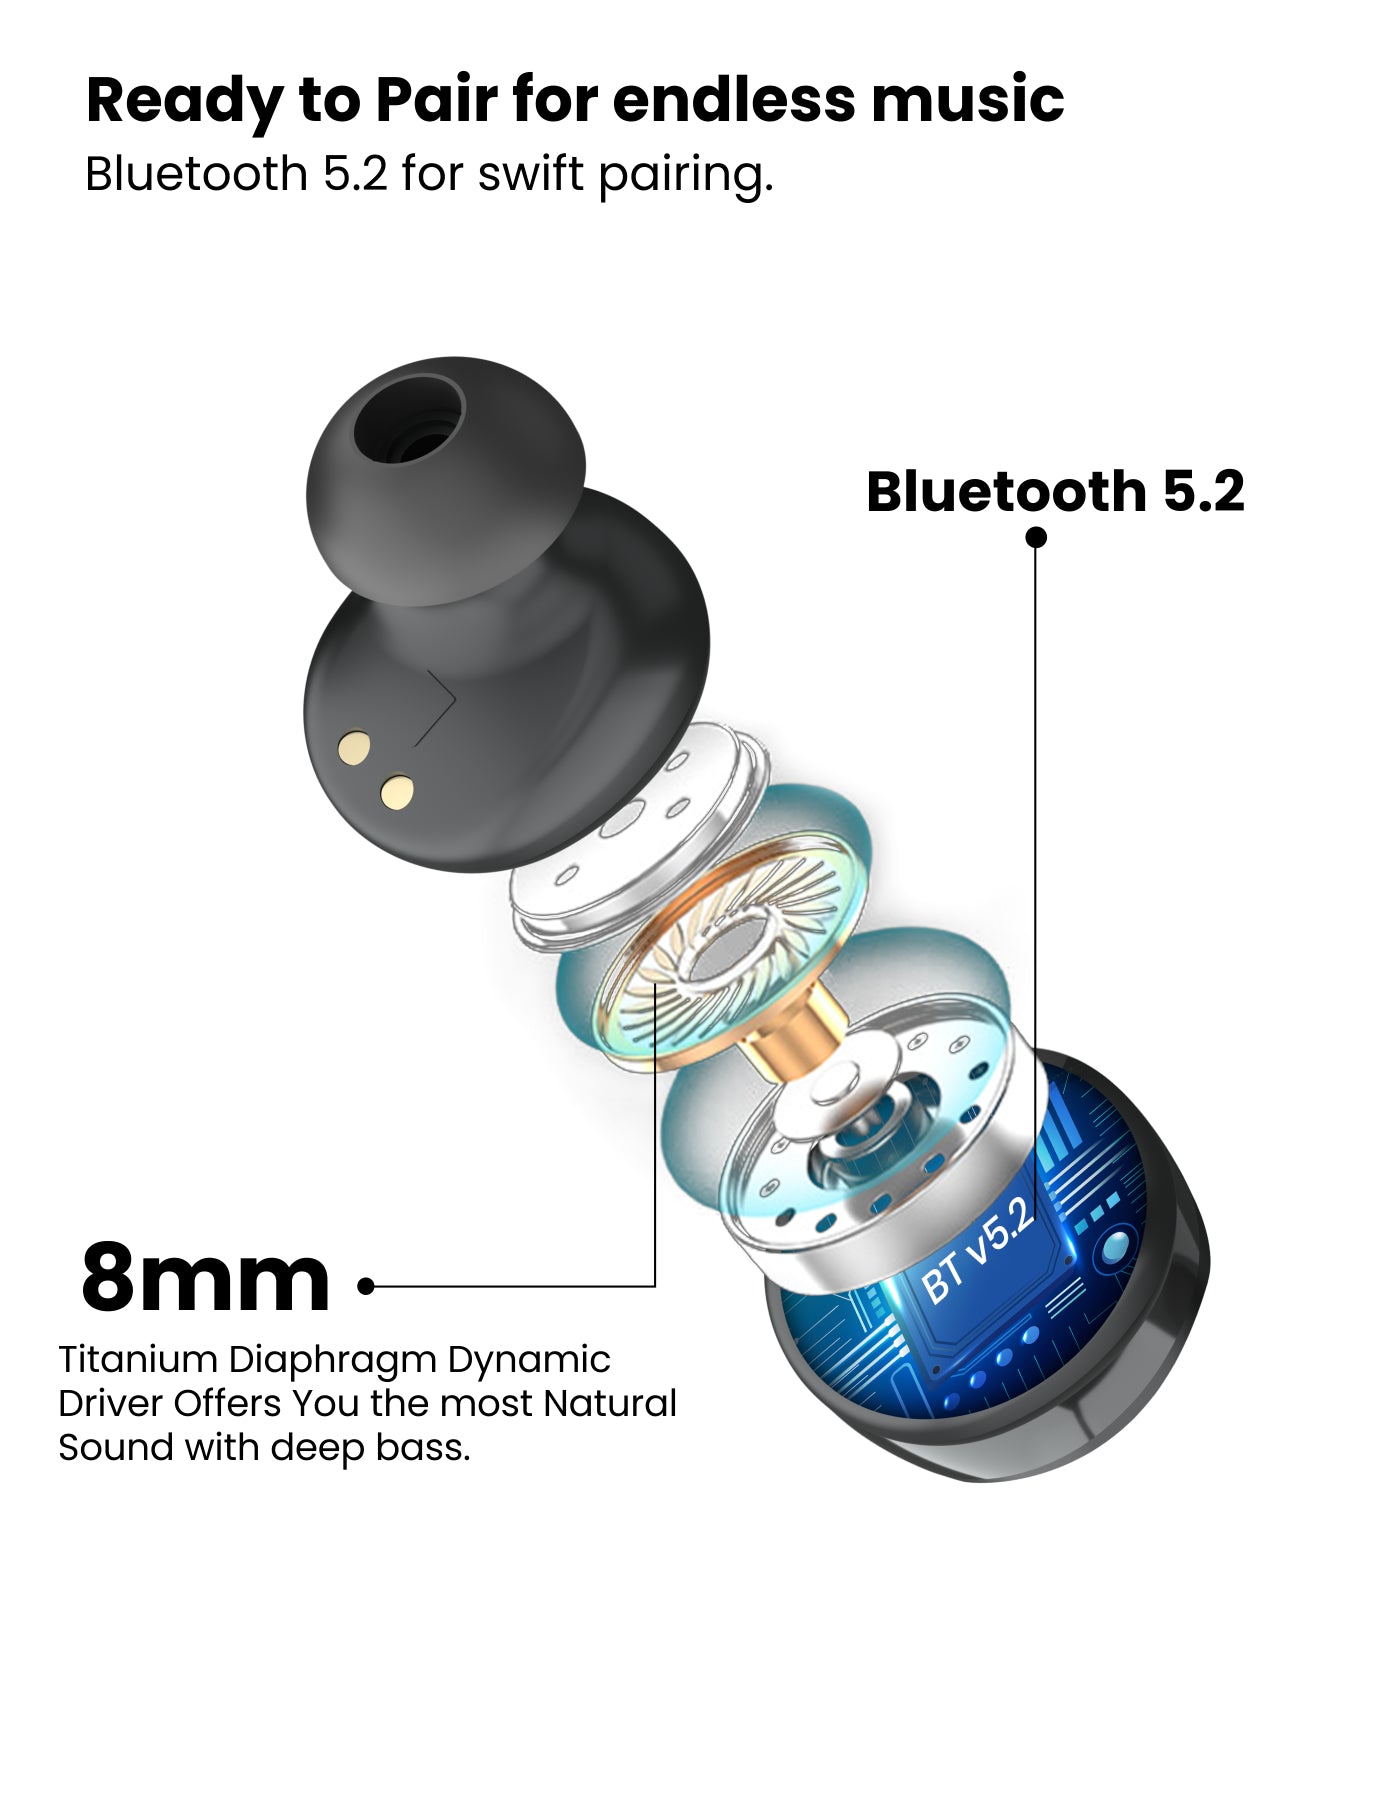 Bluetooth 5.2 supported in Portronics Harmonics Twins S3 earbuds